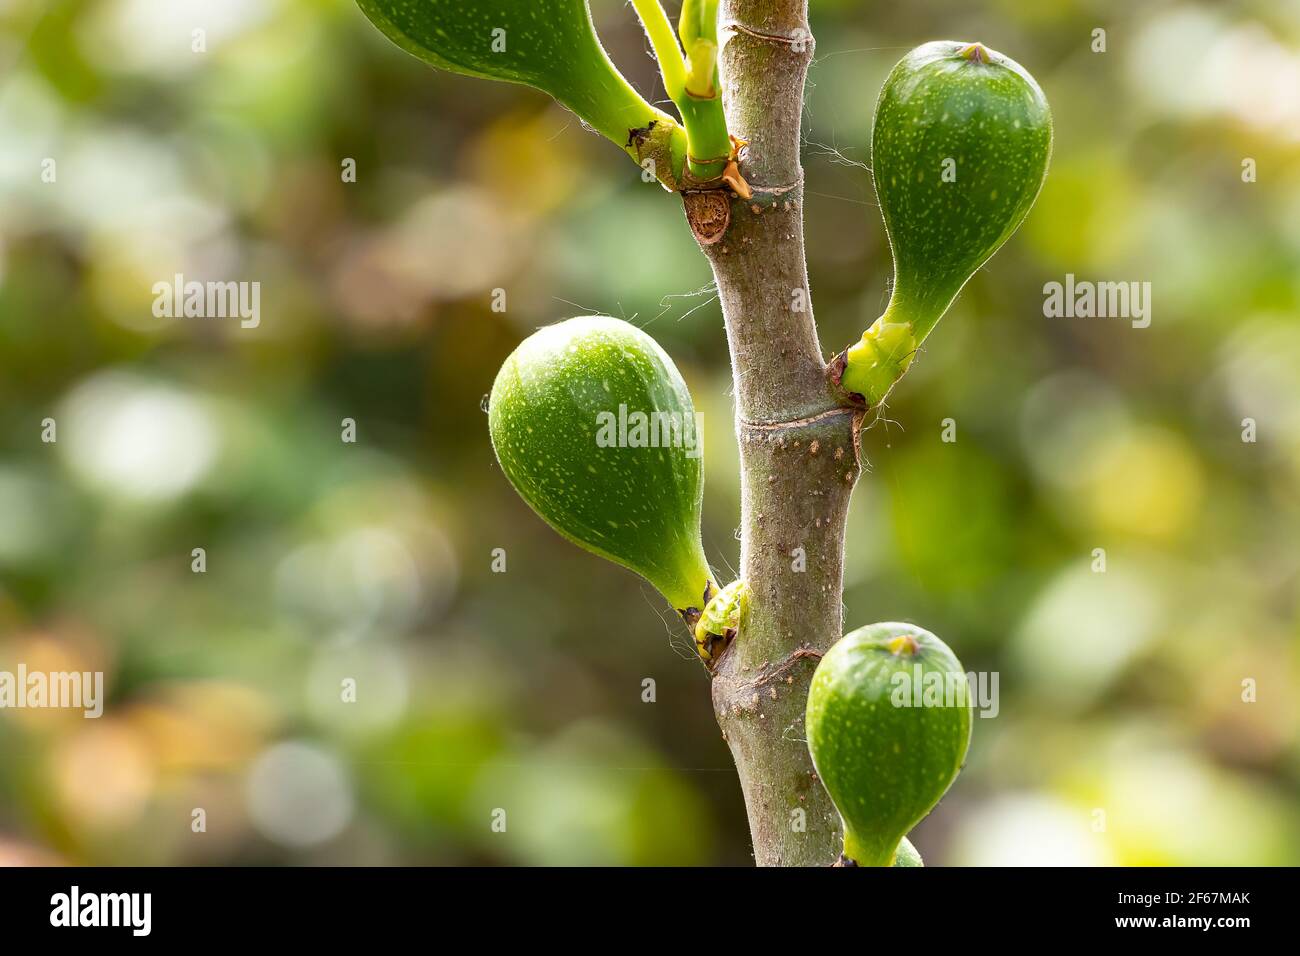 Branch of a fig tree with immature green figs Stock Photo